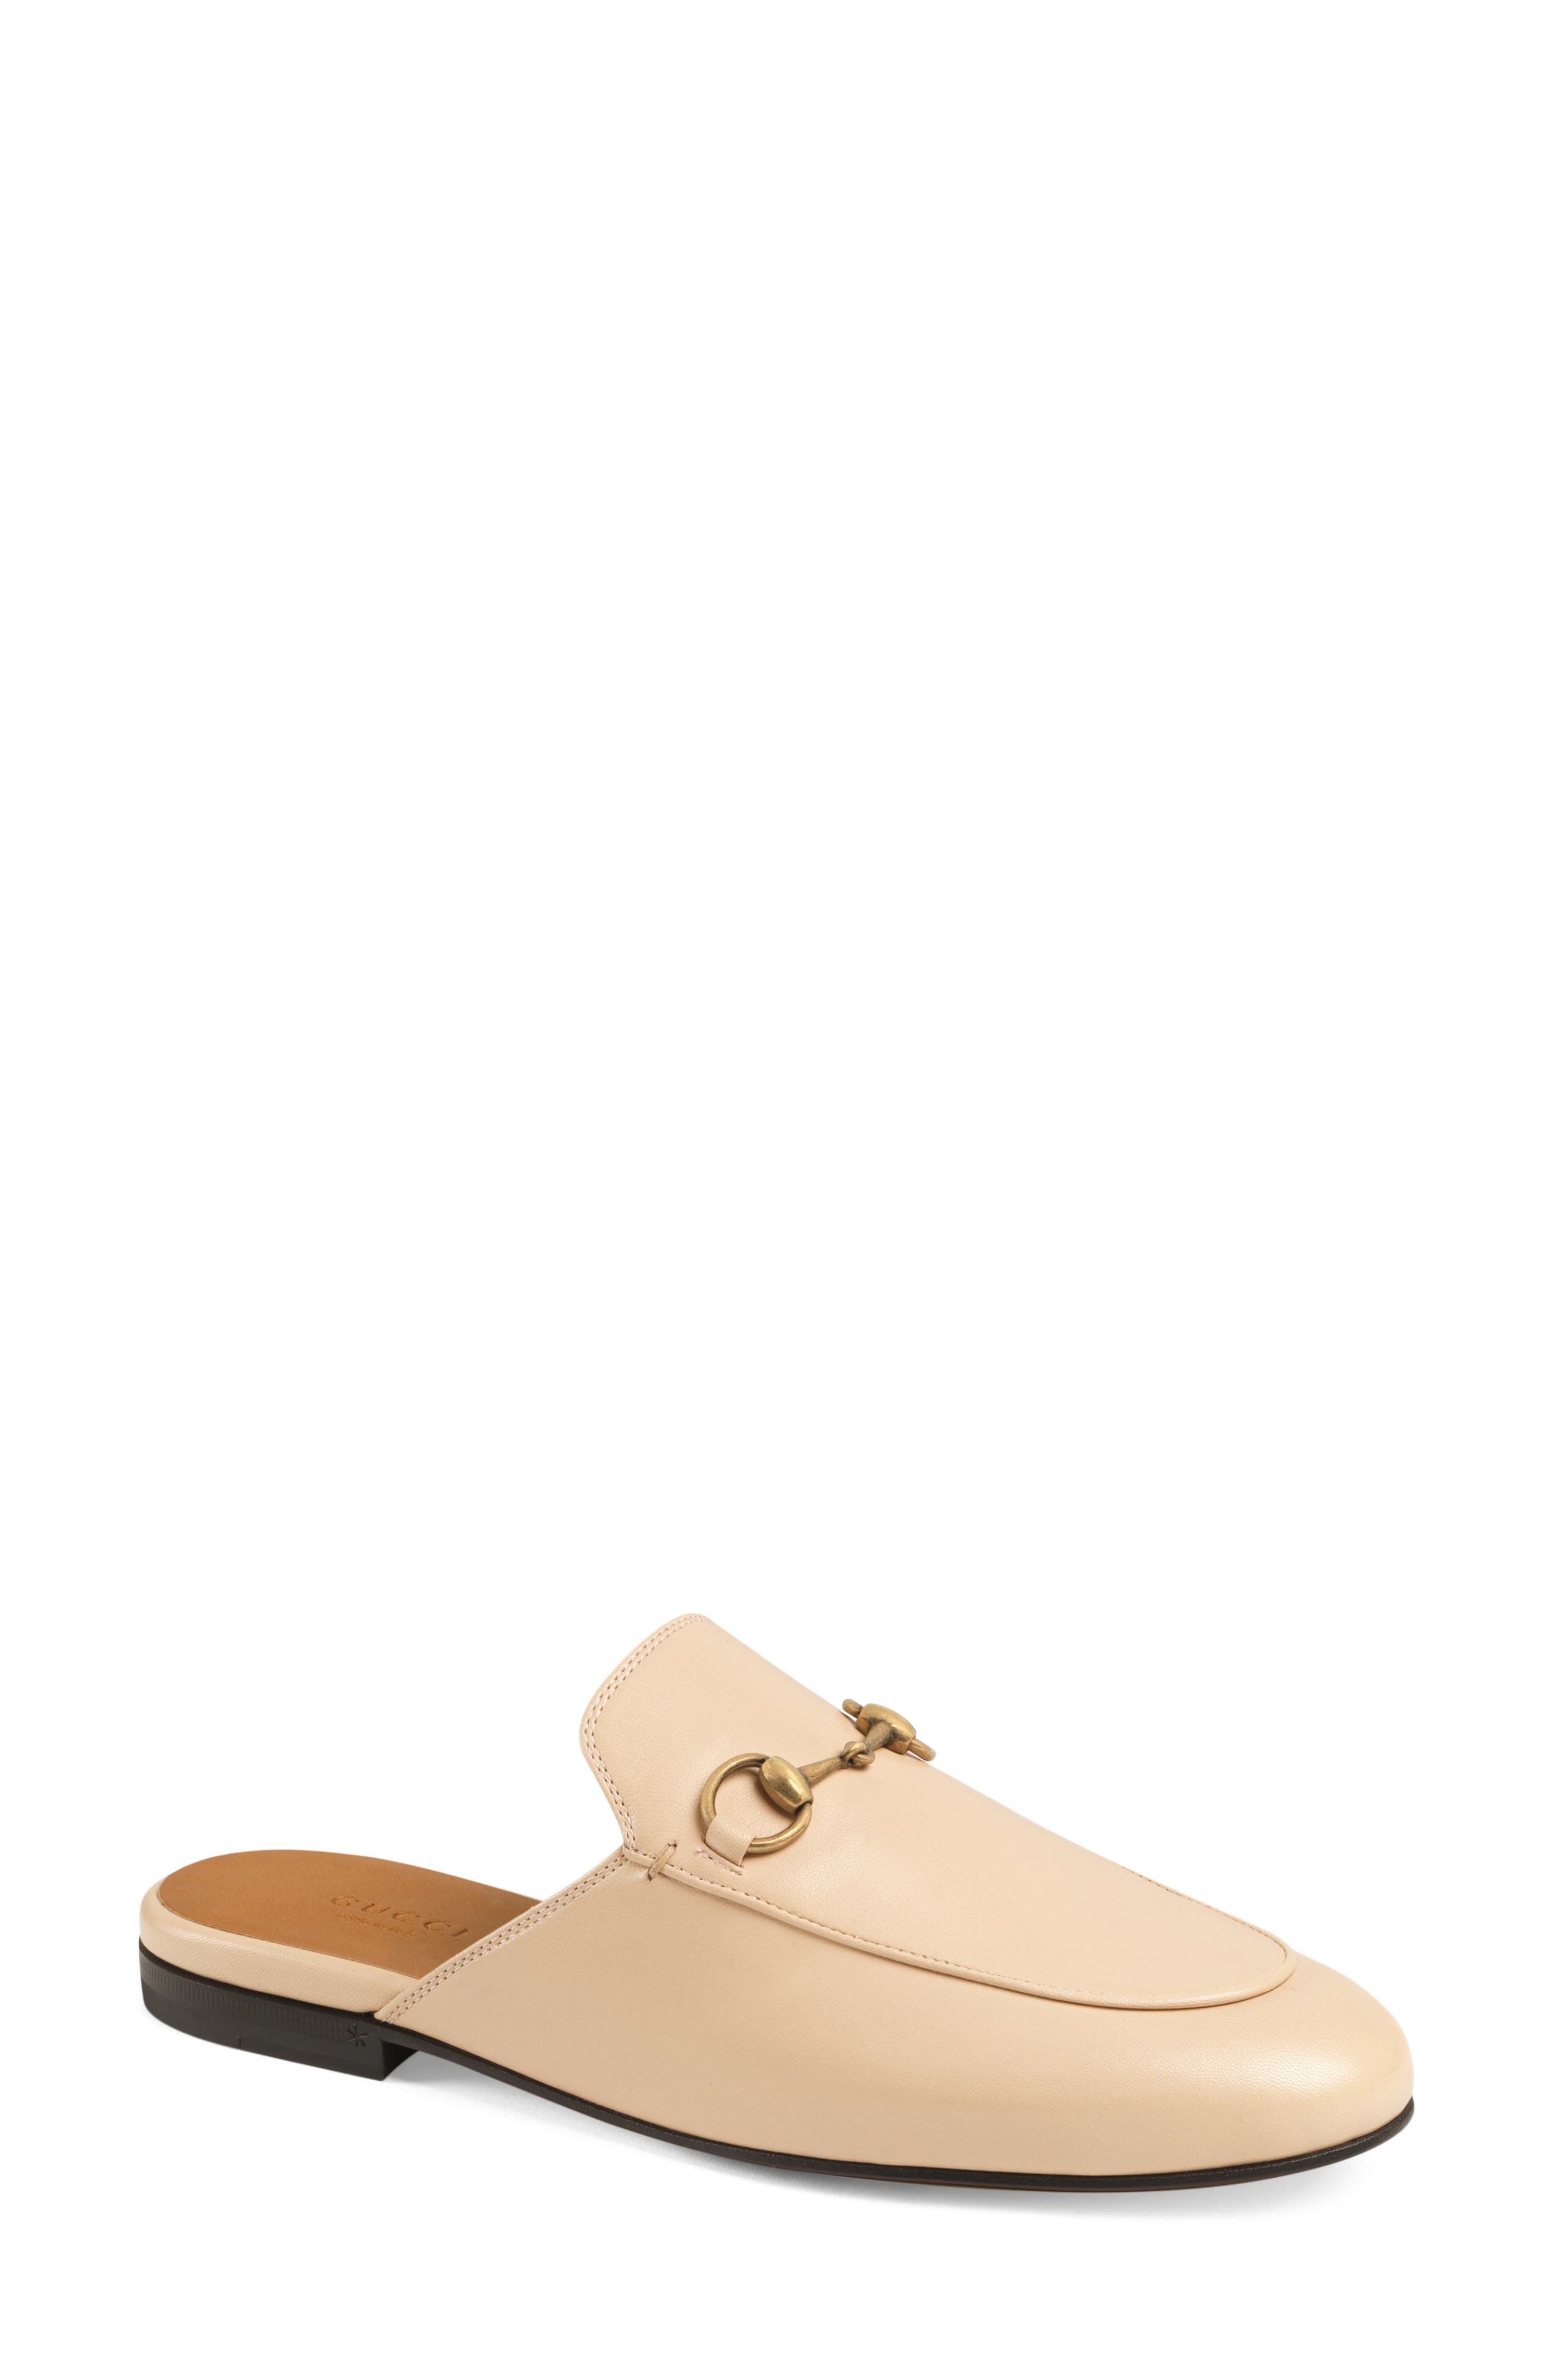 nude color loafers